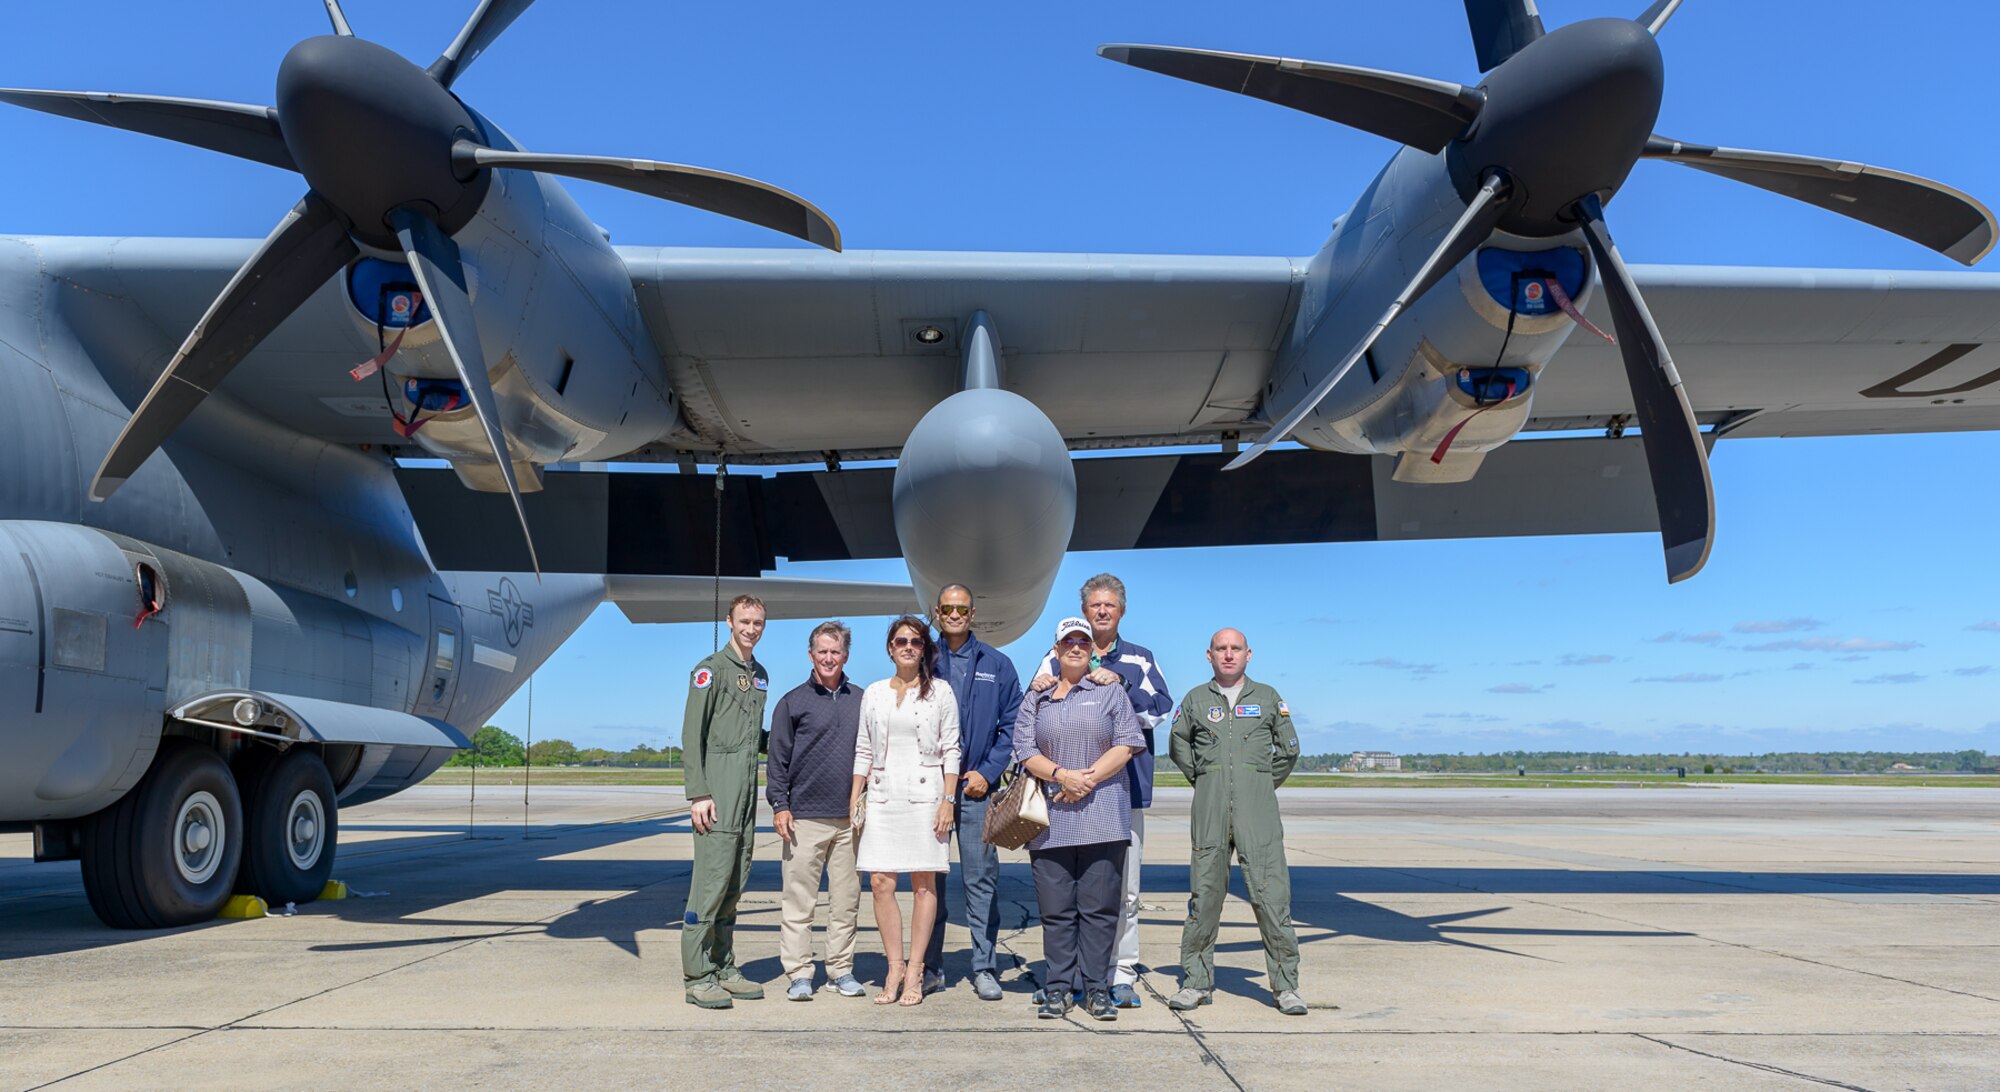 53rd Weather Reconnaissance Squadron pilots, Professional Golf Association Tour Champion players and the president of S2 Global Rapiscan Systems pose for a group photo in front of a WC-130J Super Hercules aircraft during the Rapiscan System Golf Classic players’ tour March 20, 2018, on Keesler Air Force Base, Mississippi. The attending golfers who are participating in the 2018 Rapiscan System Golf Classic also toured the military working dog kennel and received a Science on a Sphere demonstration. (U.S. Air Force photo by André Askew)